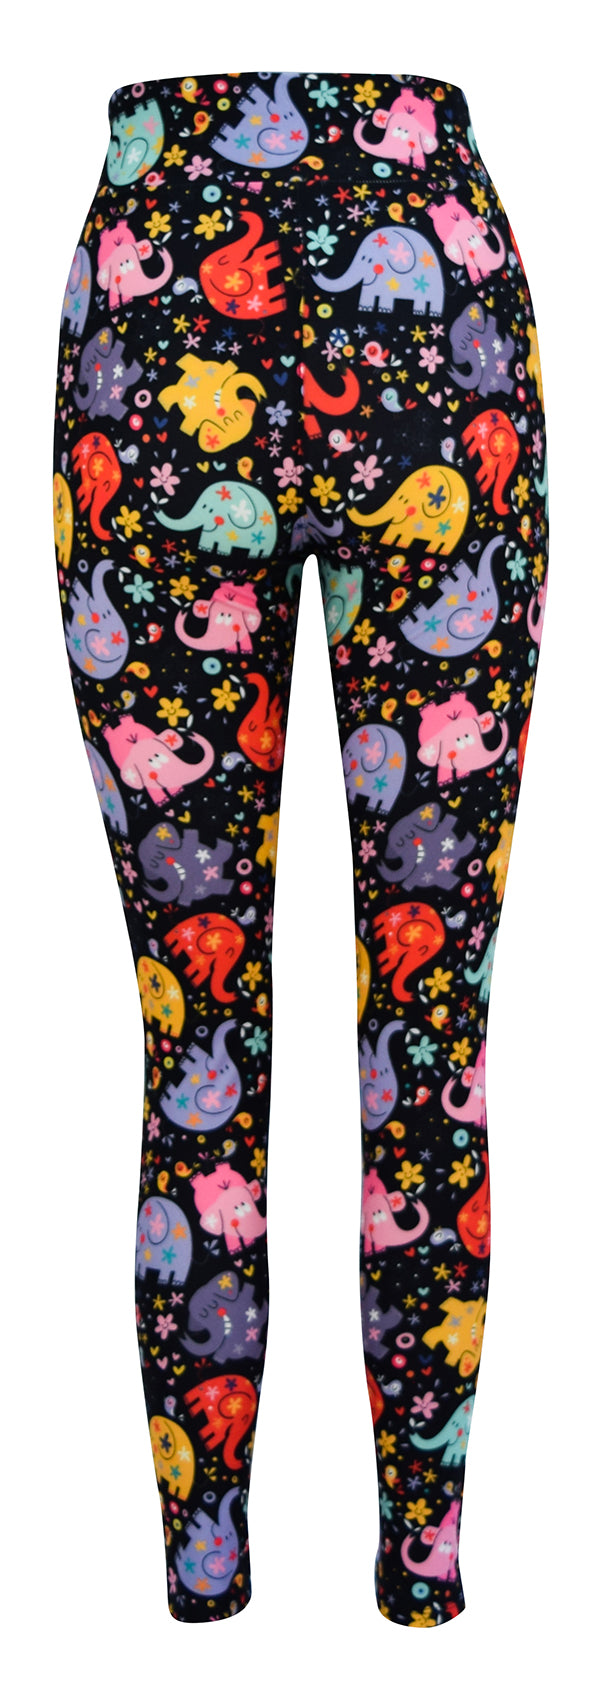 Nelly The Elephant-Adult Leggings